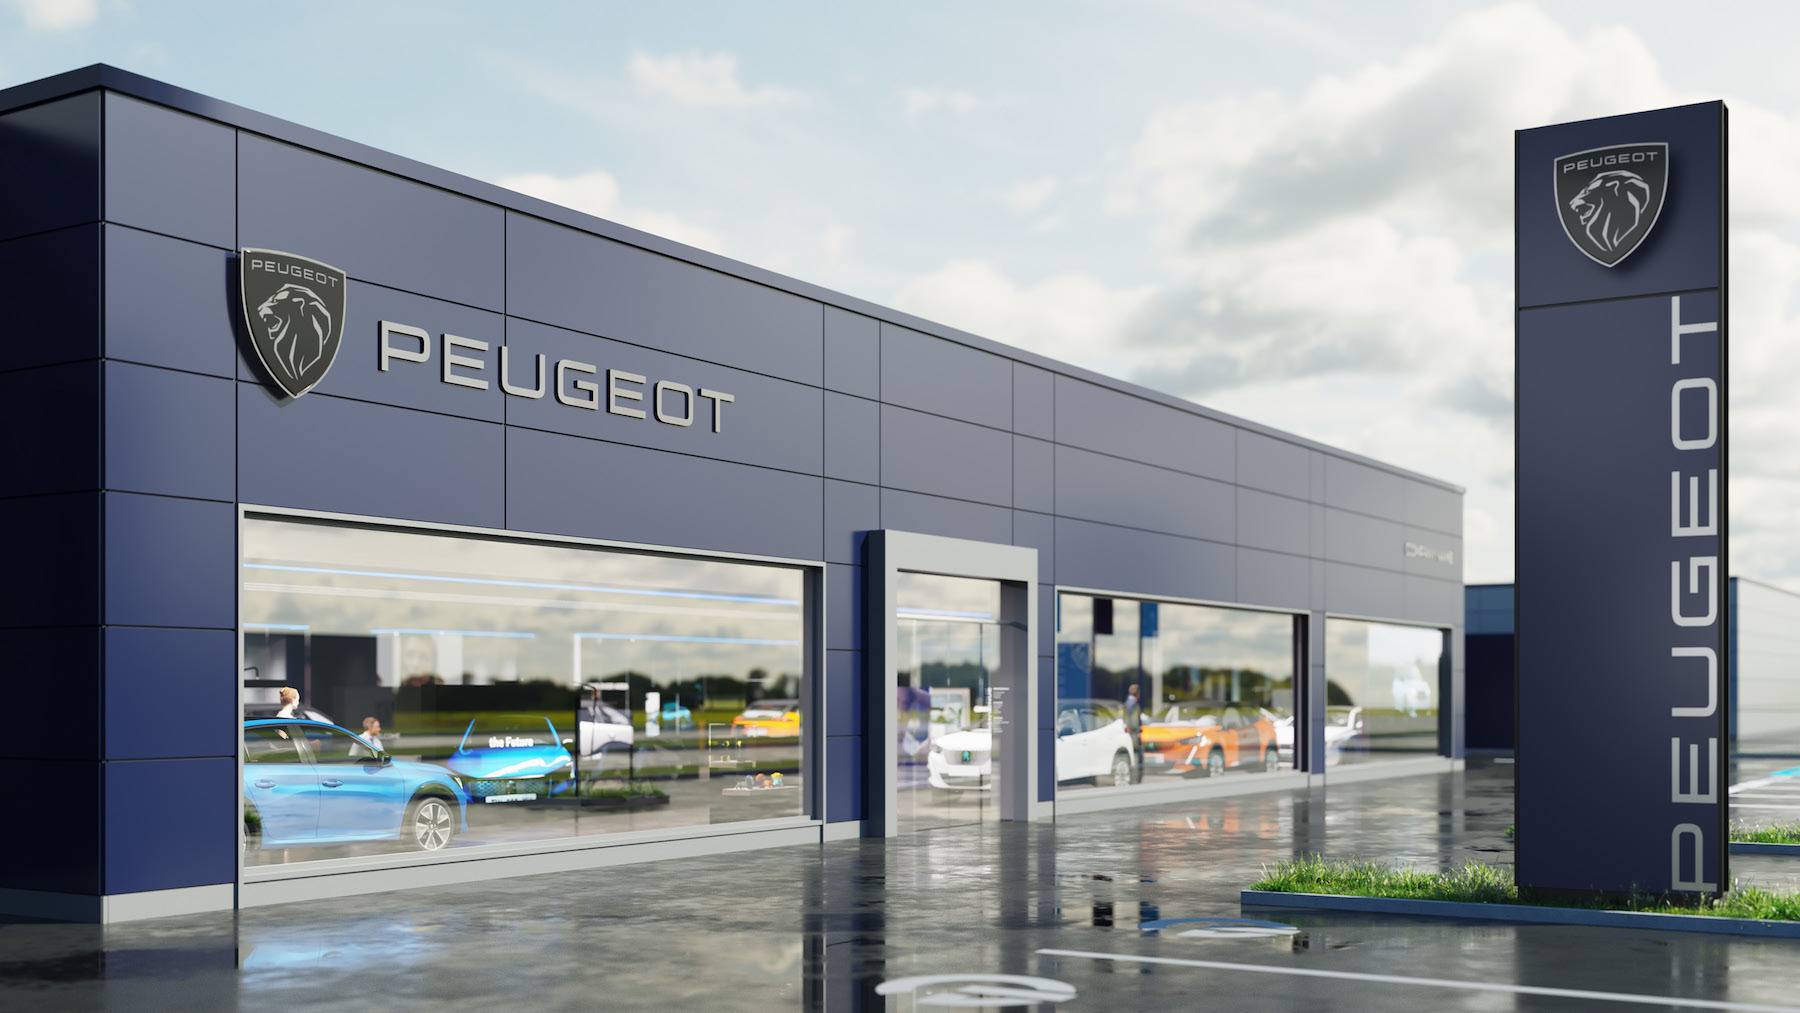 Peugeot unveils new logo for digital future and hopes to